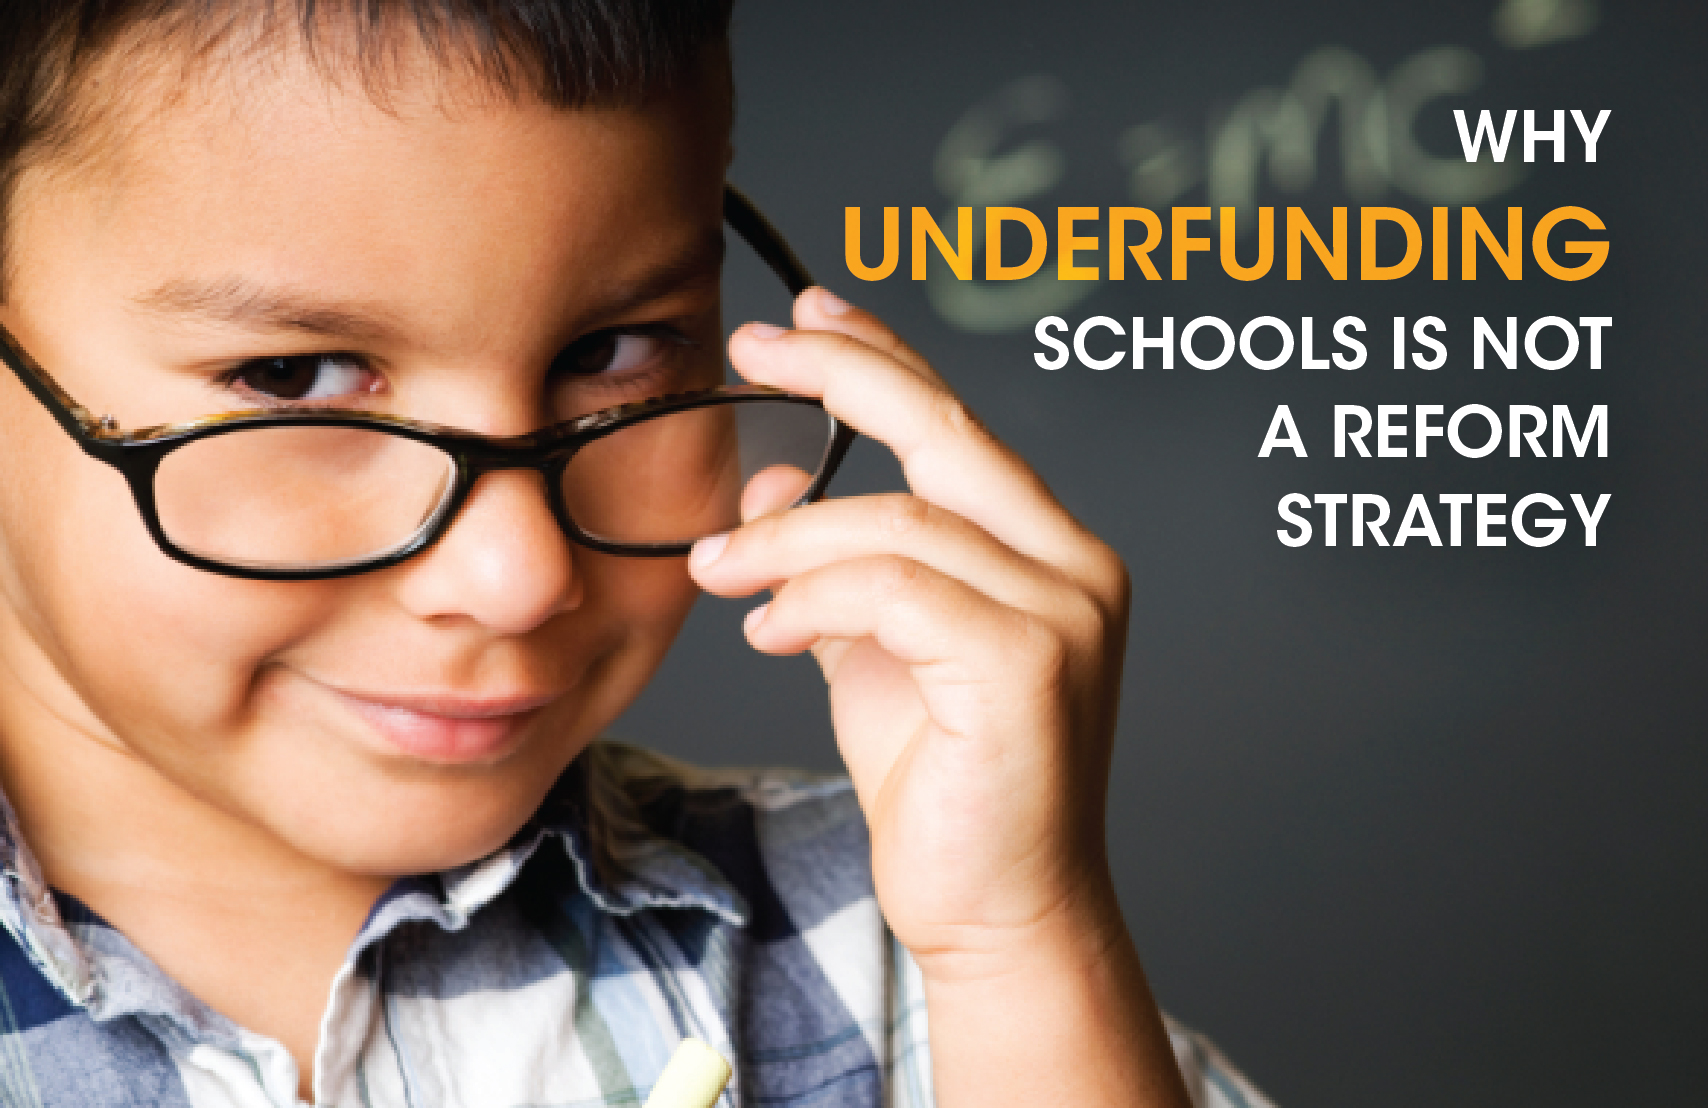 Why underfunding schools is not a reform strategy-03